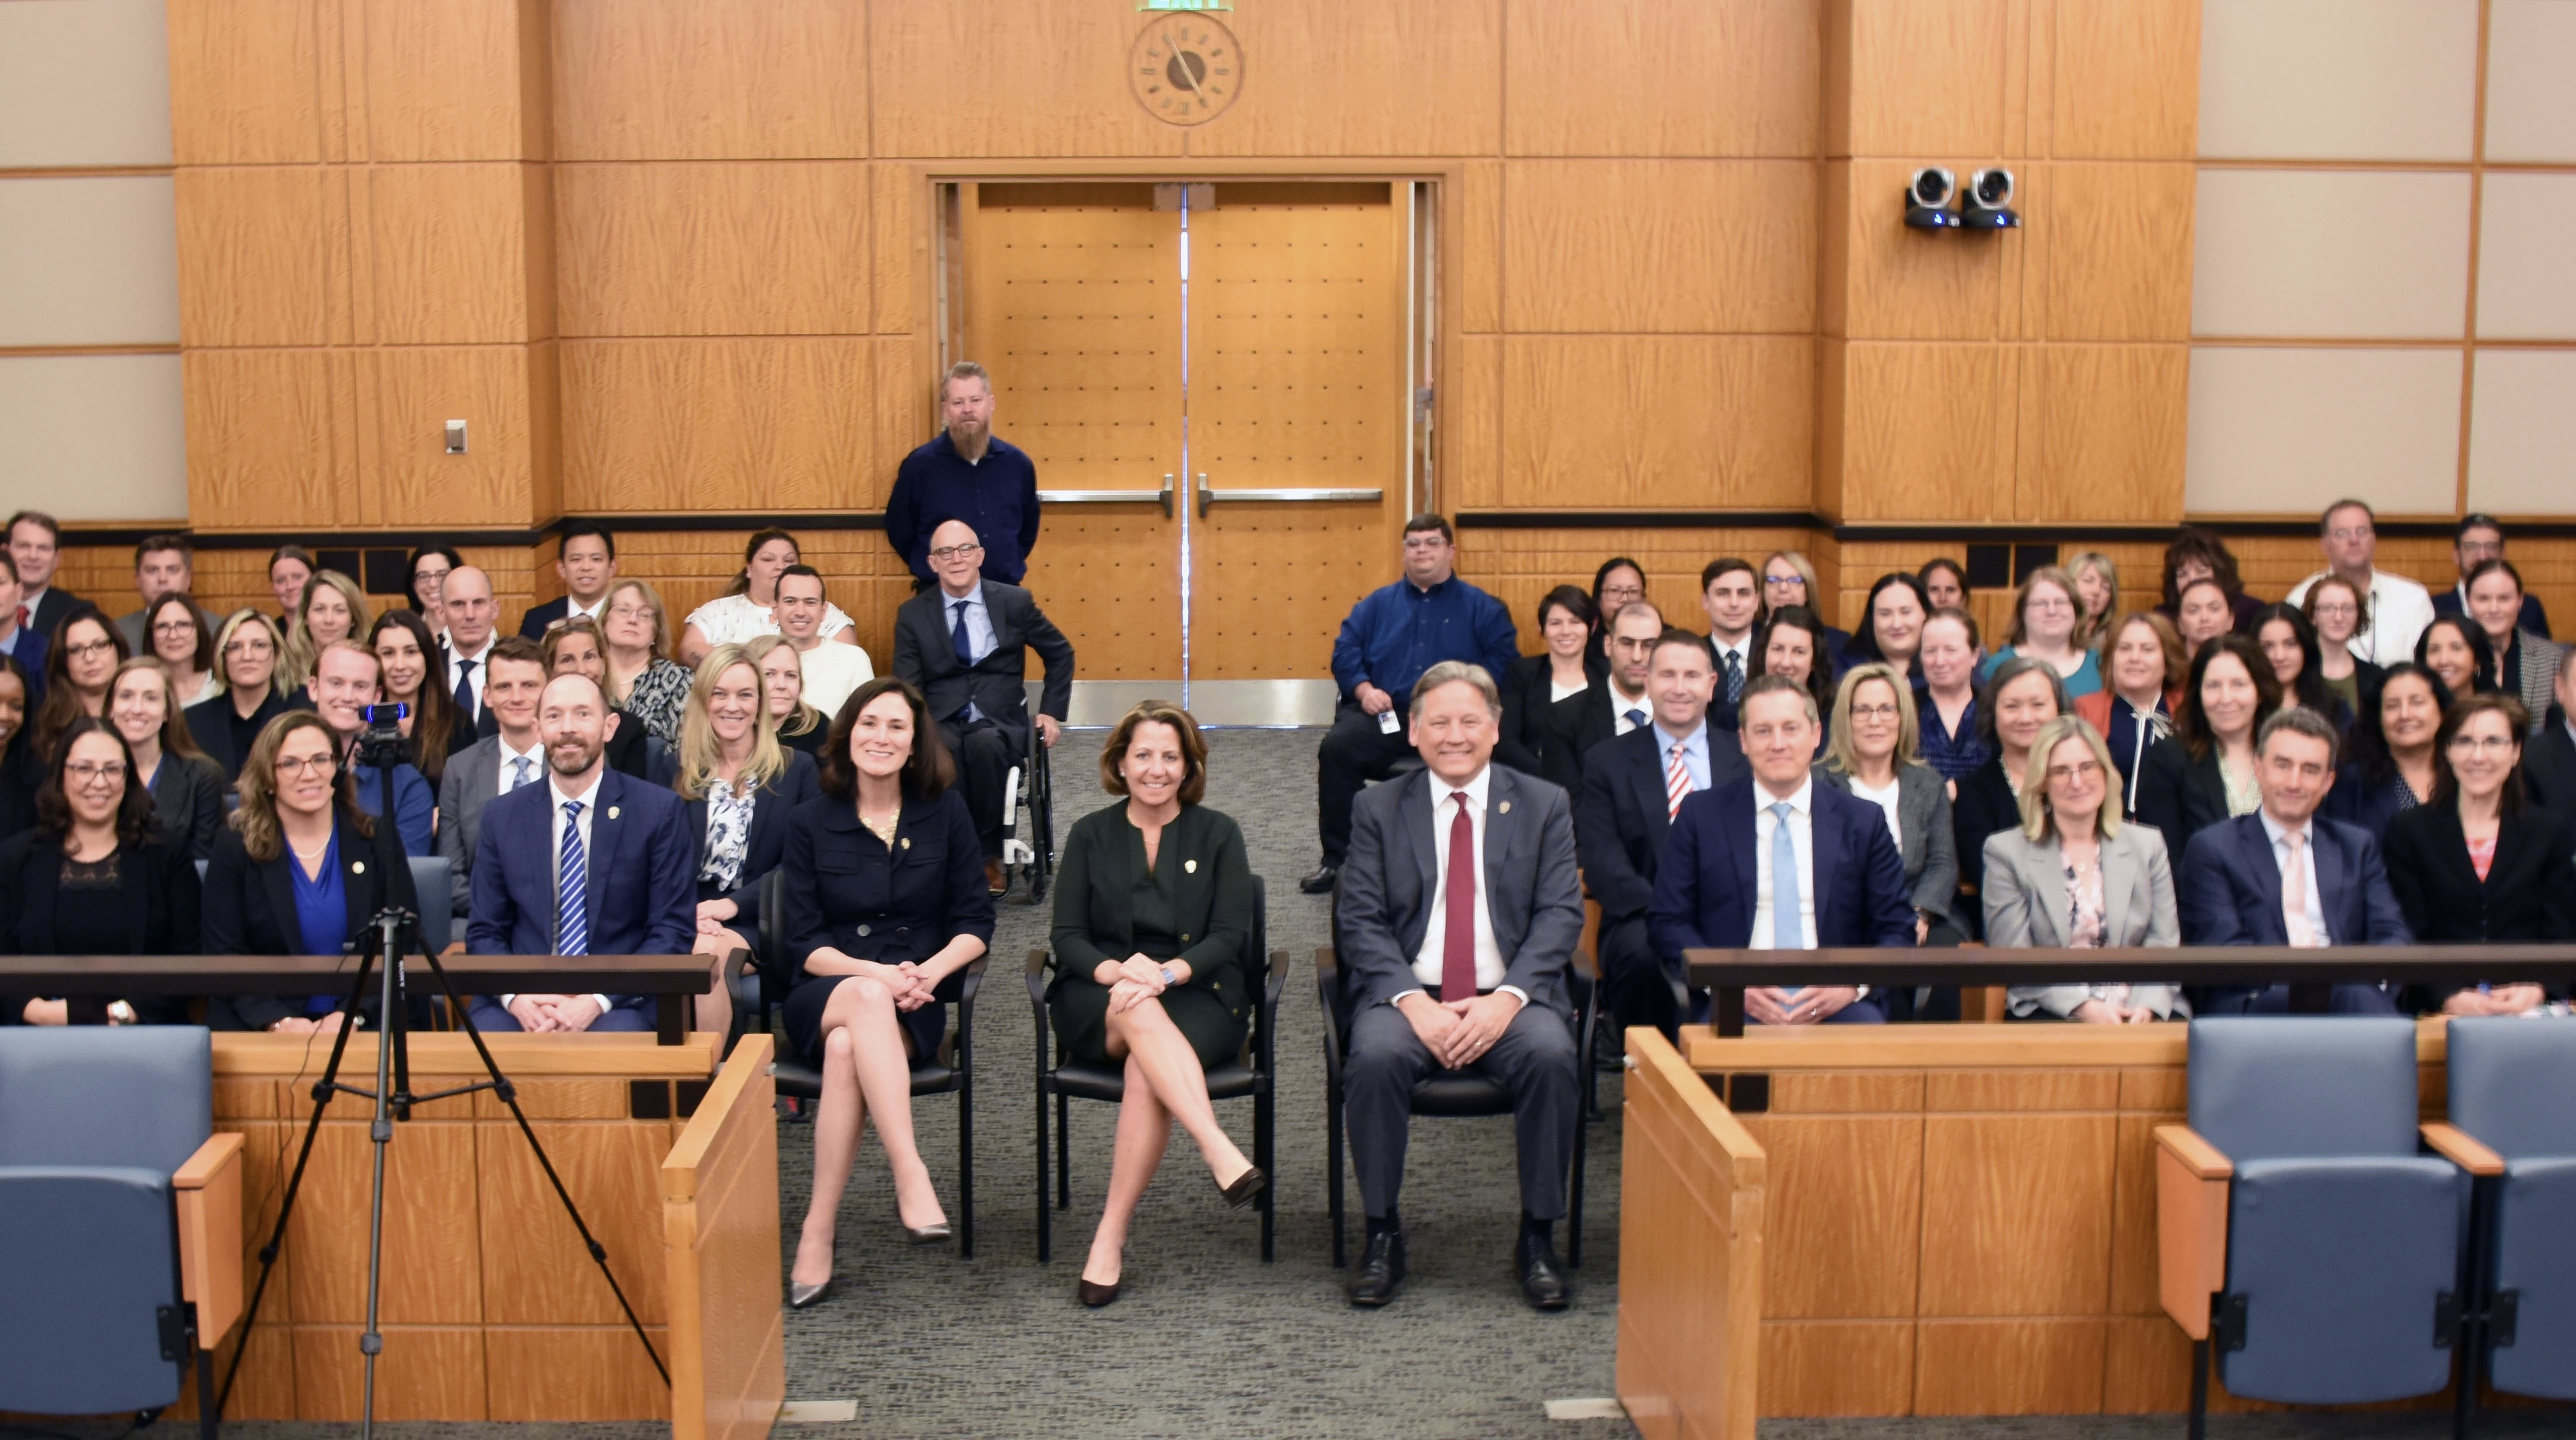 Deputy Attorney General Monaco with U.S. Attorney Phillip A. Talbert and staff at the U.S. Attorney's Office for the Eastern District of California